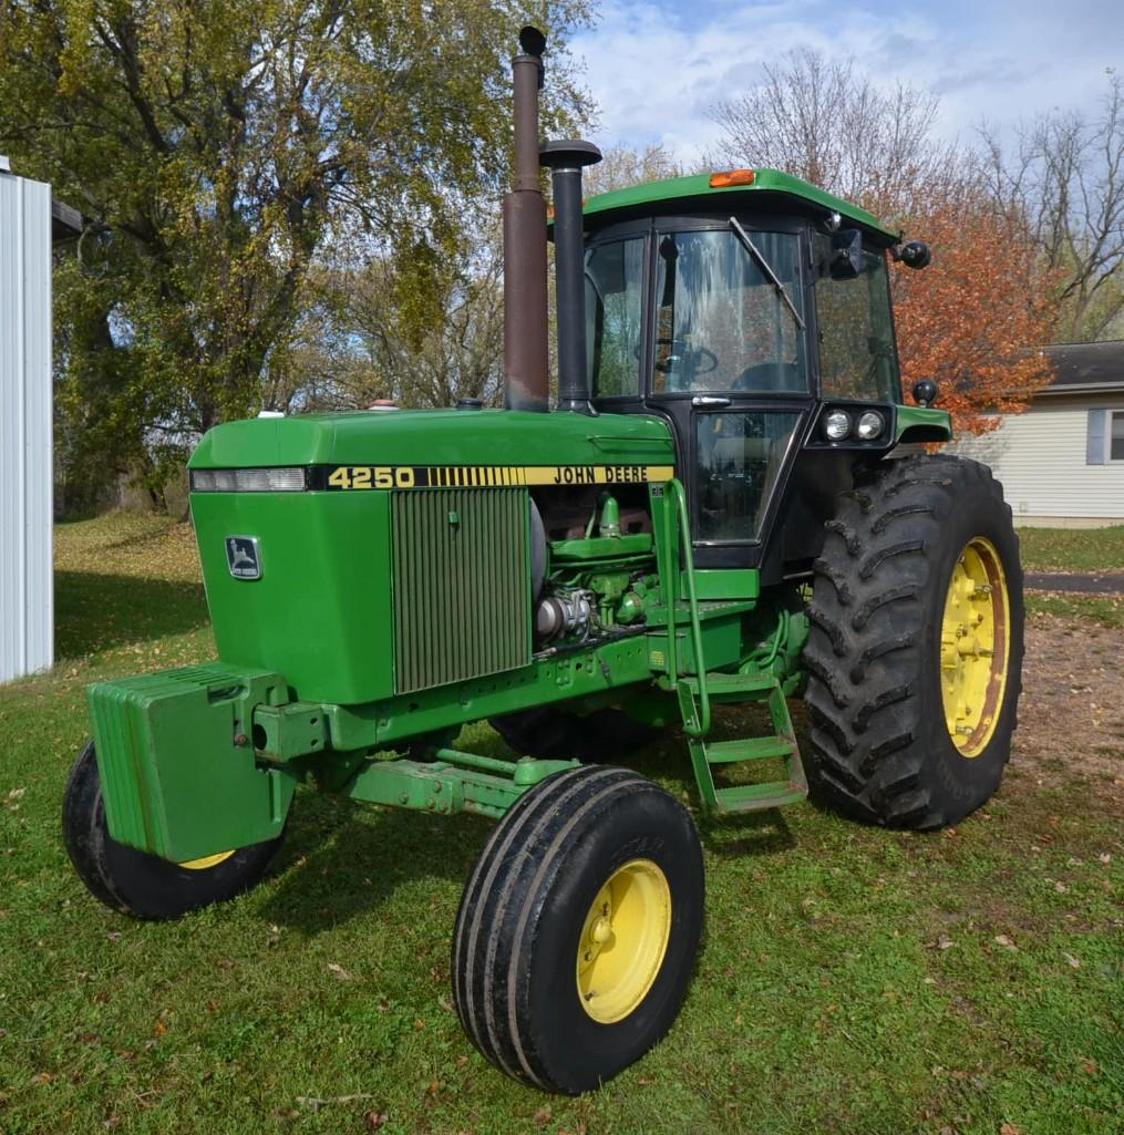 JD 9400 COMBINE, JD 4250 TRACTOR, AND FARM EQUIPMENT